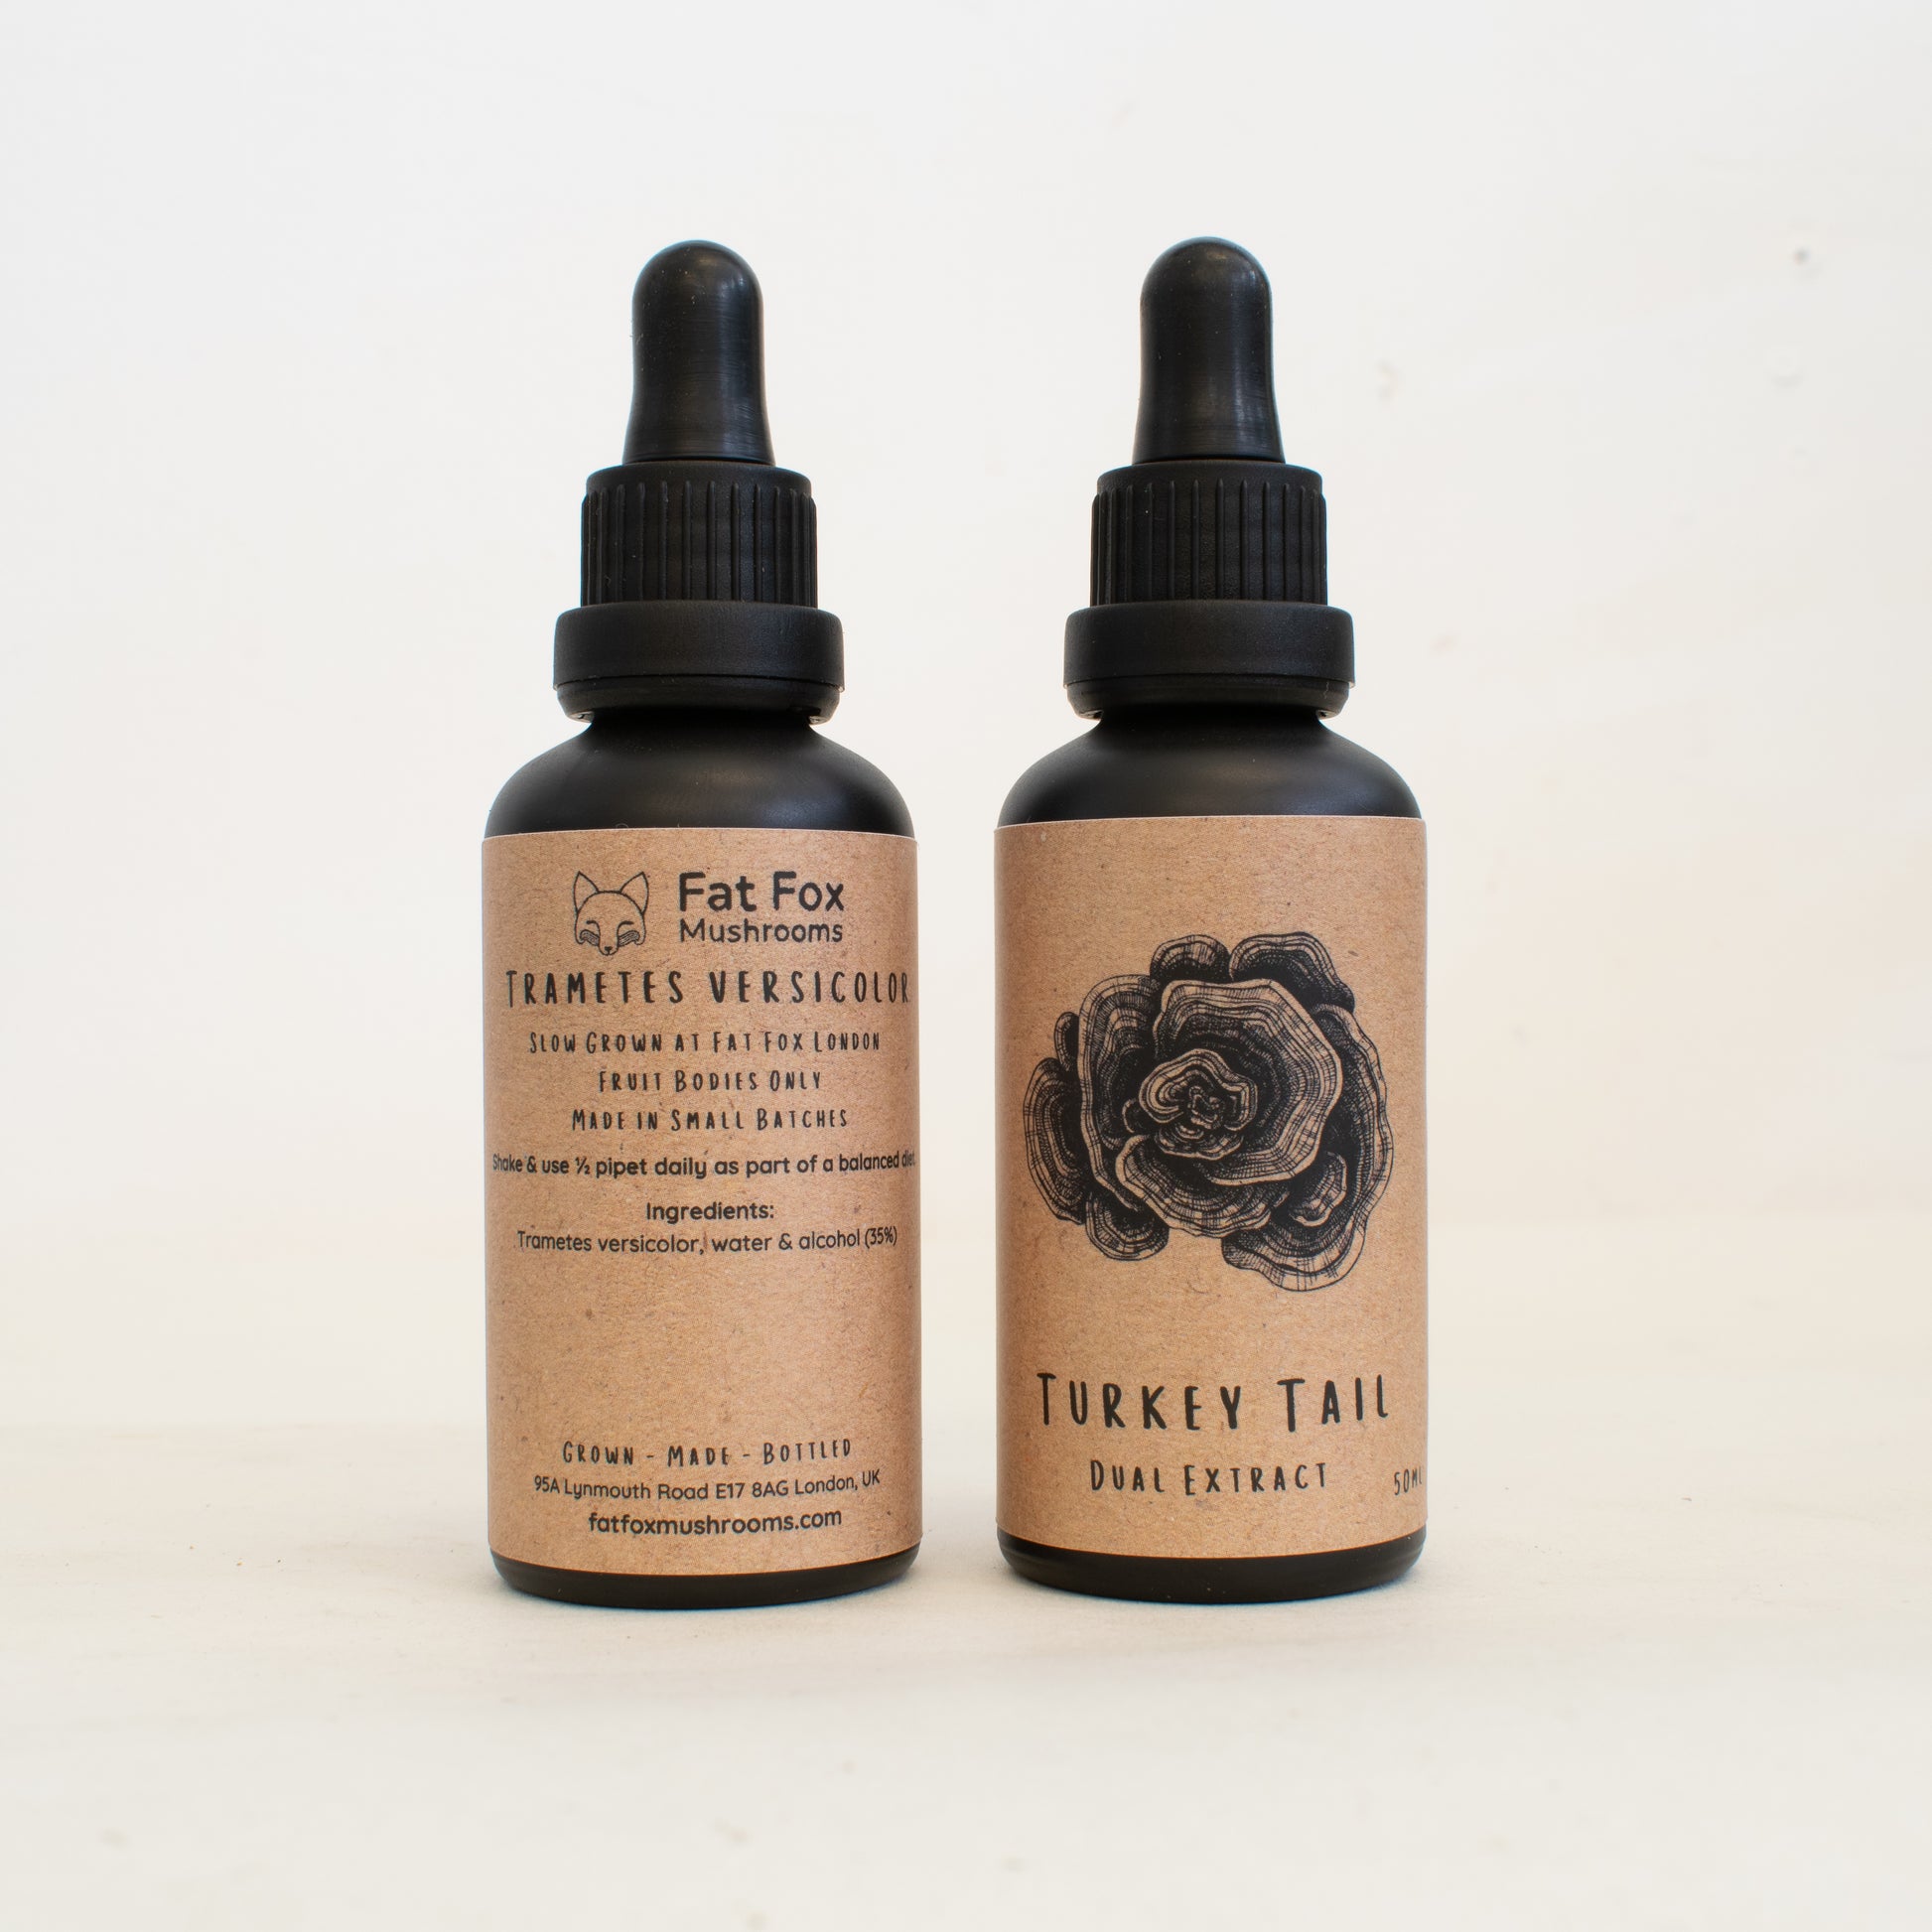 Trametes versicolor dual-extract tinctures made by Fat Fox Mushrooms.